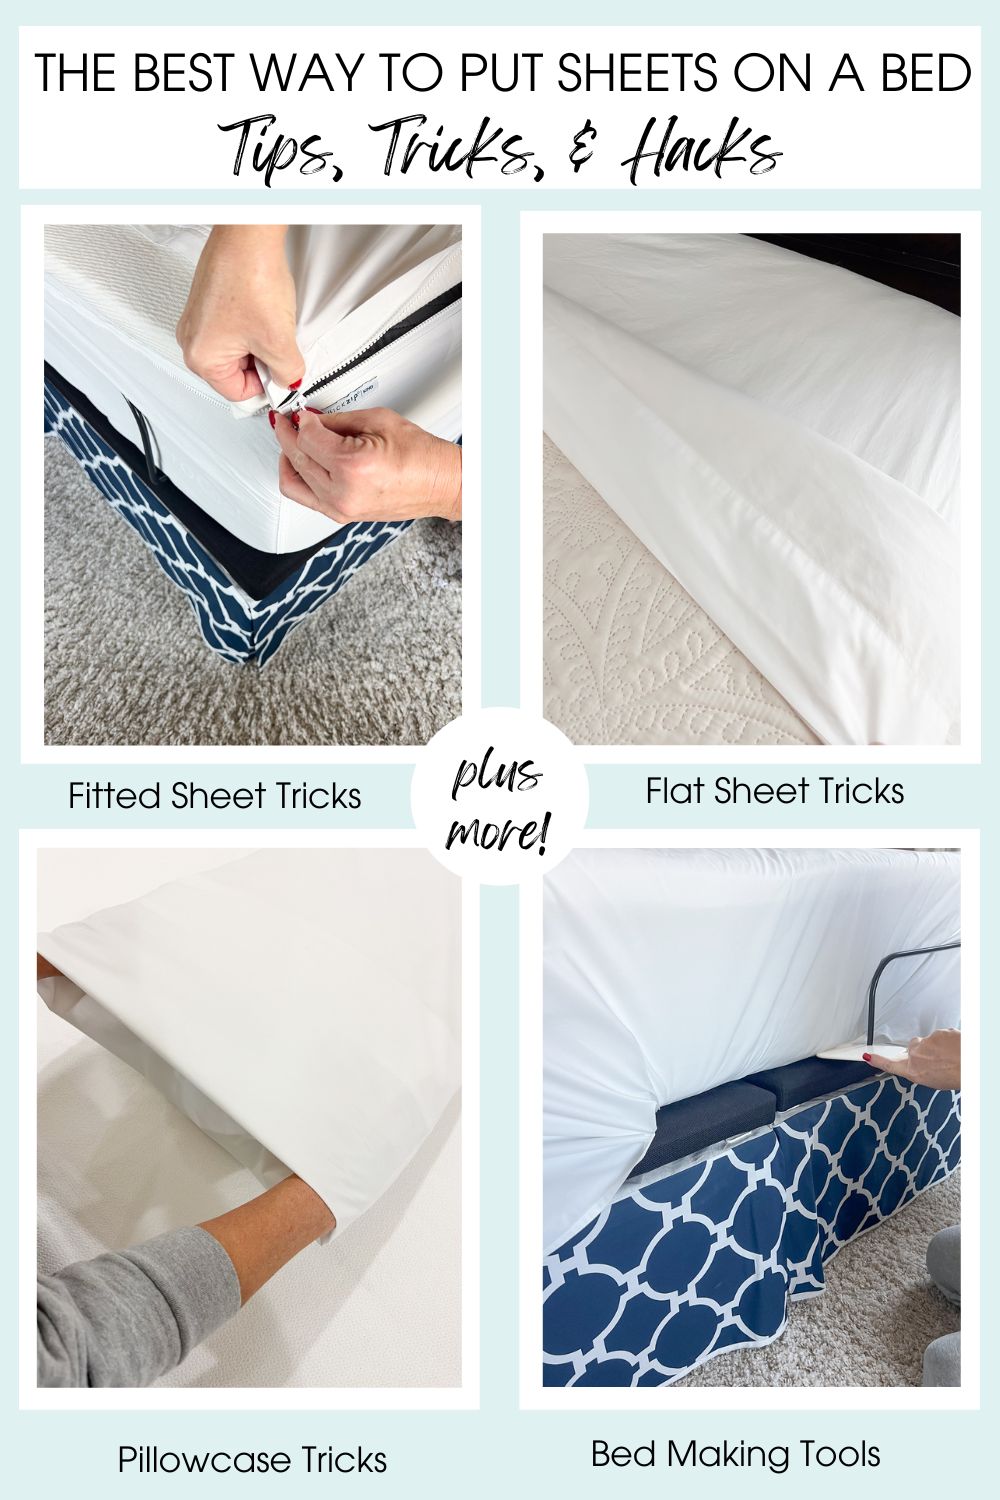 The Best Way to Put on Bed Sheets: Tips, Tricks, and Hacks